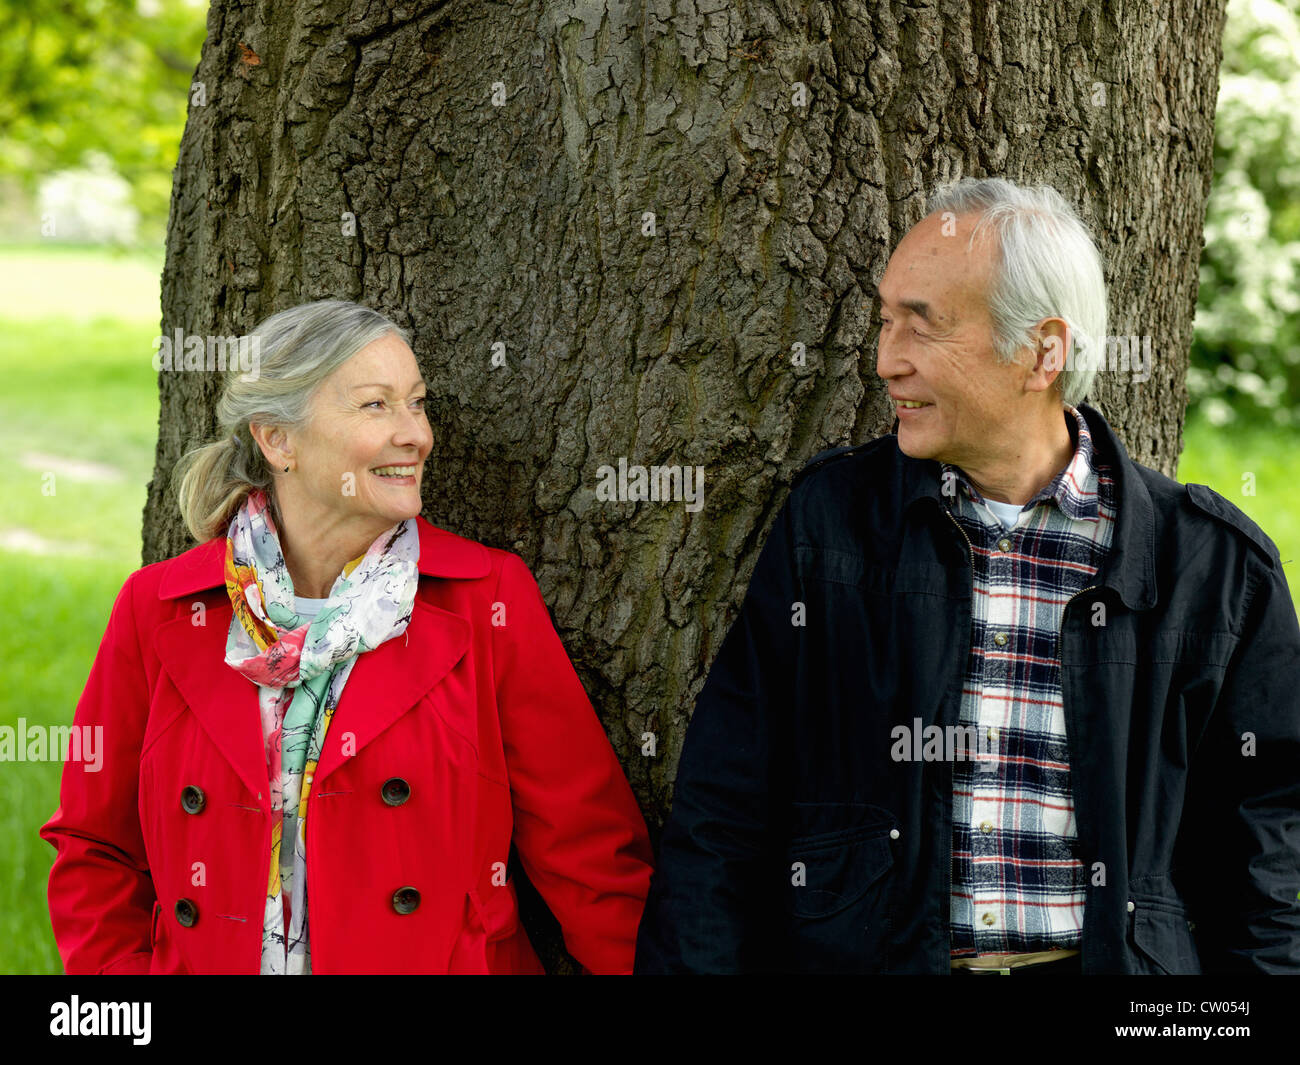 Older couple walking together in park Stock Photo